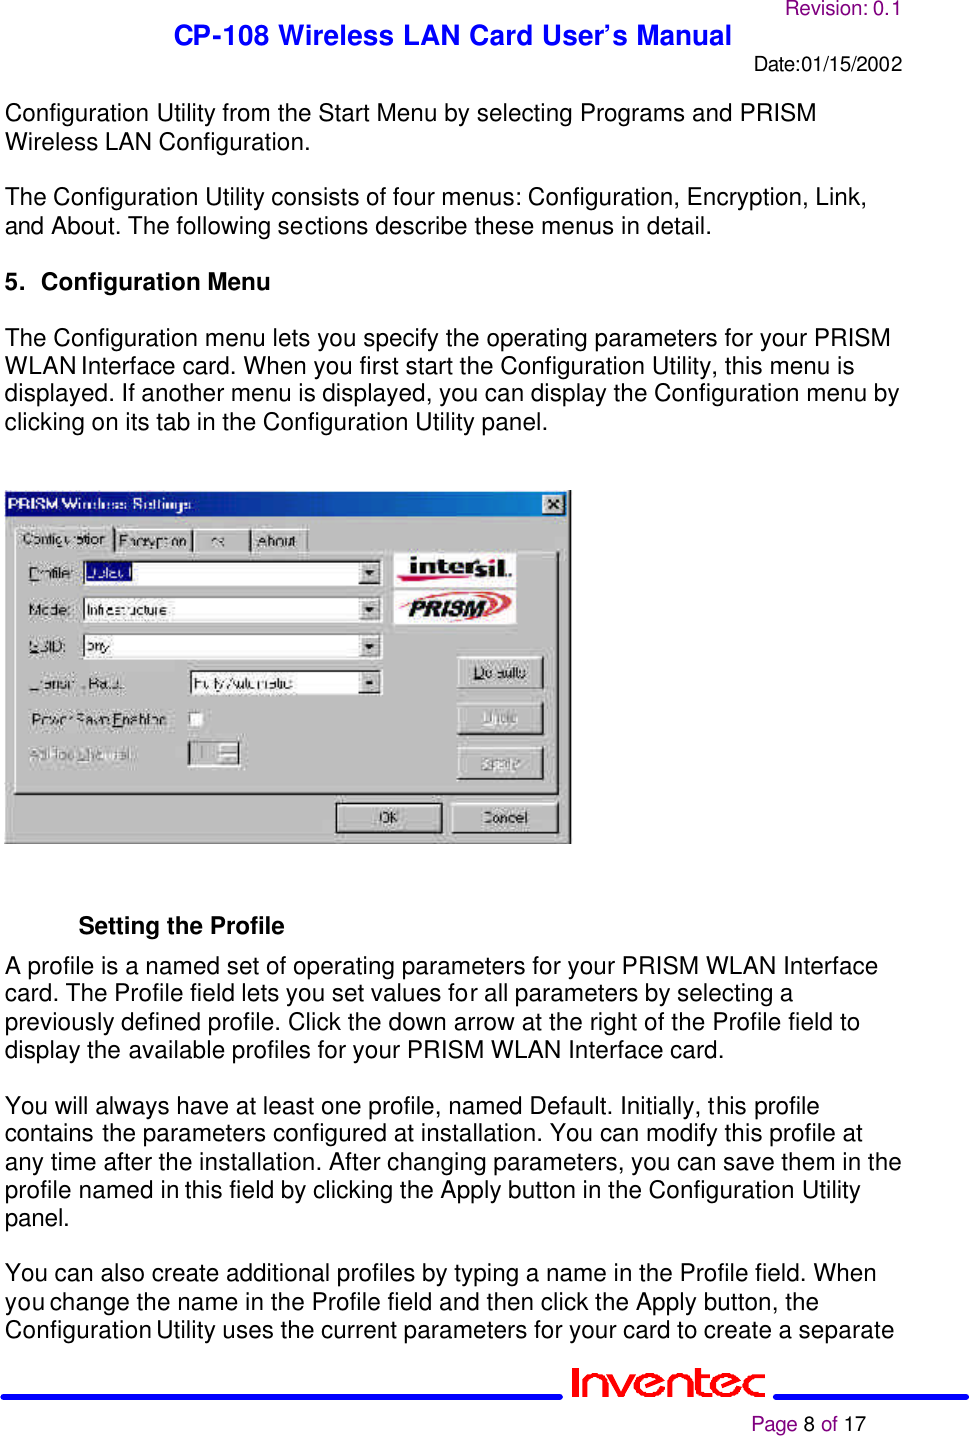 Revision: 0.1 CP-108 Wireless LAN Card User’s Manual Date:01/15/2002                                                                                                                                                             Page 8 of 17  Configuration Utility from the Start Menu by selecting Programs and PRISM Wireless LAN Configuration.  The Configuration Utility consists of four menus: Configuration, Encryption, Link, and About. The following sections describe these menus in detail.  5. Configuration Menu  The Configuration menu lets you specify the operating parameters for your PRISM WLAN Interface card. When you first start the Configuration Utility, this menu is displayed. If another menu is displayed, you can display the Configuration menu by clicking on its tab in the Configuration Utility panel.      Setting the Profile A profile is a named set of operating parameters for your PRISM WLAN Interface card. The Profile field lets you set values for all parameters by selecting a previously defined profile. Click the down arrow at the right of the Profile field to display the available profiles for your PRISM WLAN Interface card.  You will always have at least one profile, named Default. Initially, this profile contains the parameters configured at installation. You can modify this profile at any time after the installation. After changing parameters, you can save them in the profile named in this field by clicking the Apply button in the Configuration Utility panel.  You can also create additional profiles by typing a name in the Profile field. When you change the name in the Profile field and then click the Apply button, the Configuration Utility uses the current parameters for your card to create a separate 